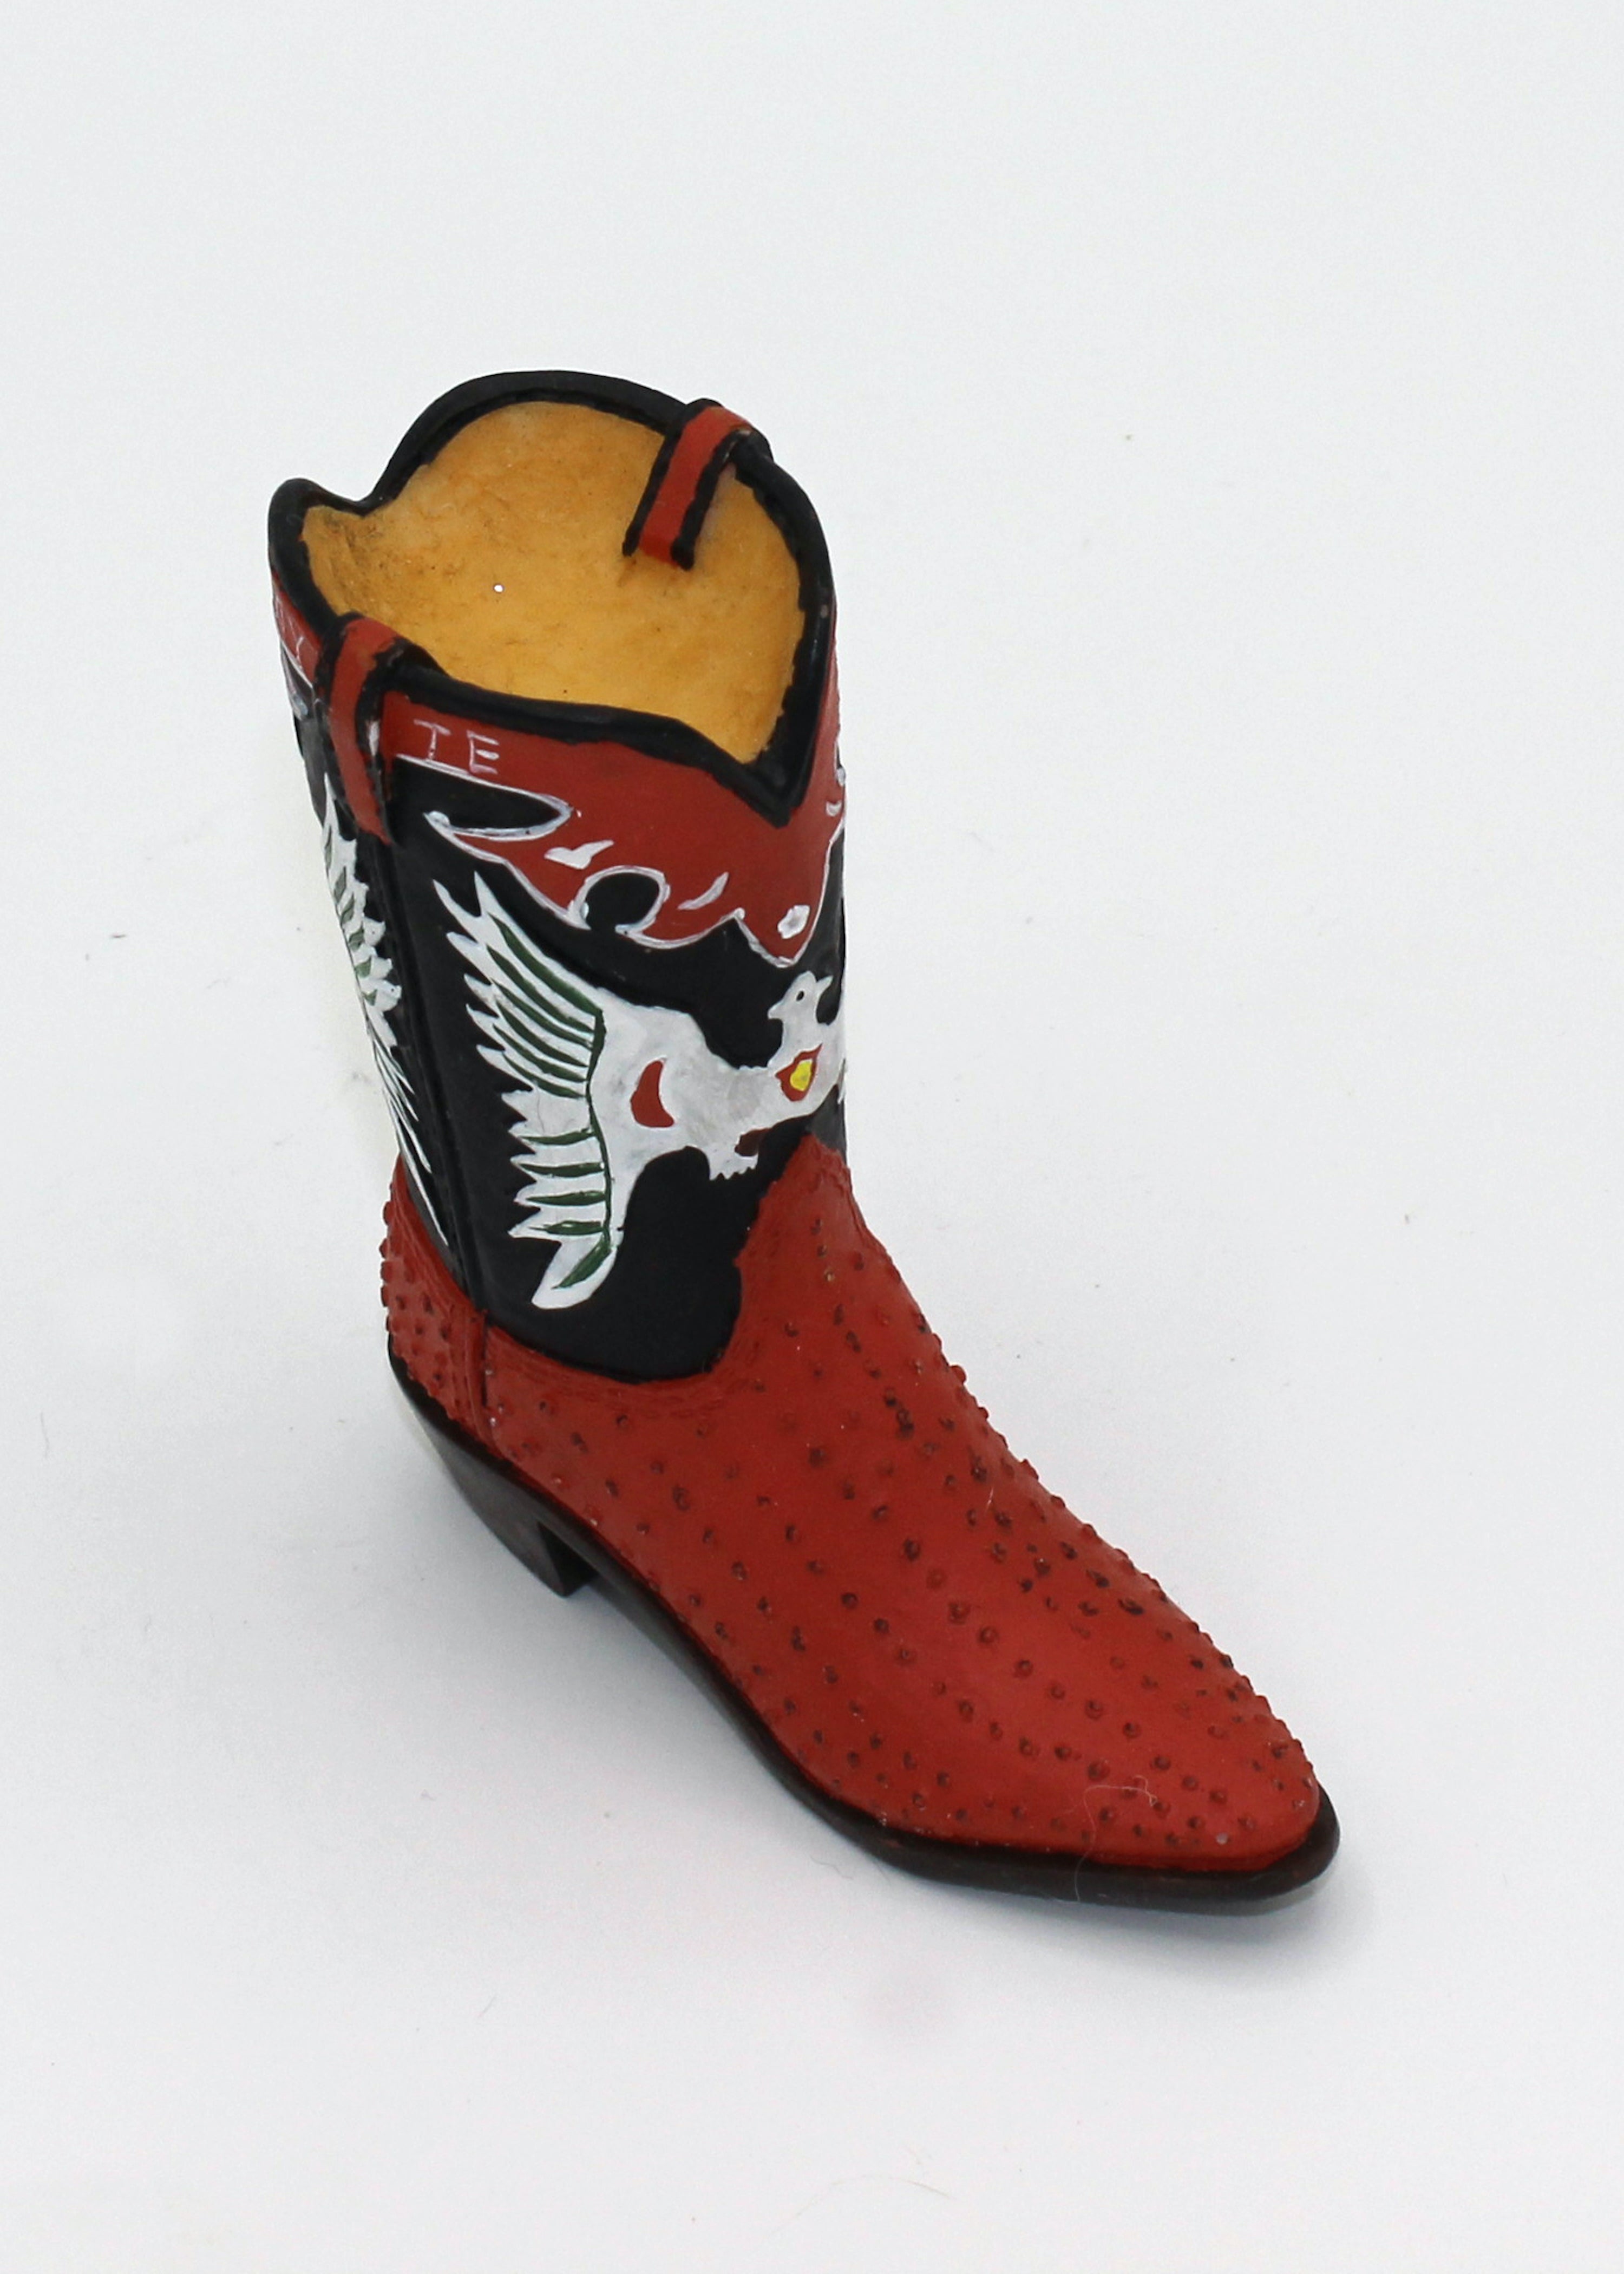 Red Mini Cowboy Boot Paperweight